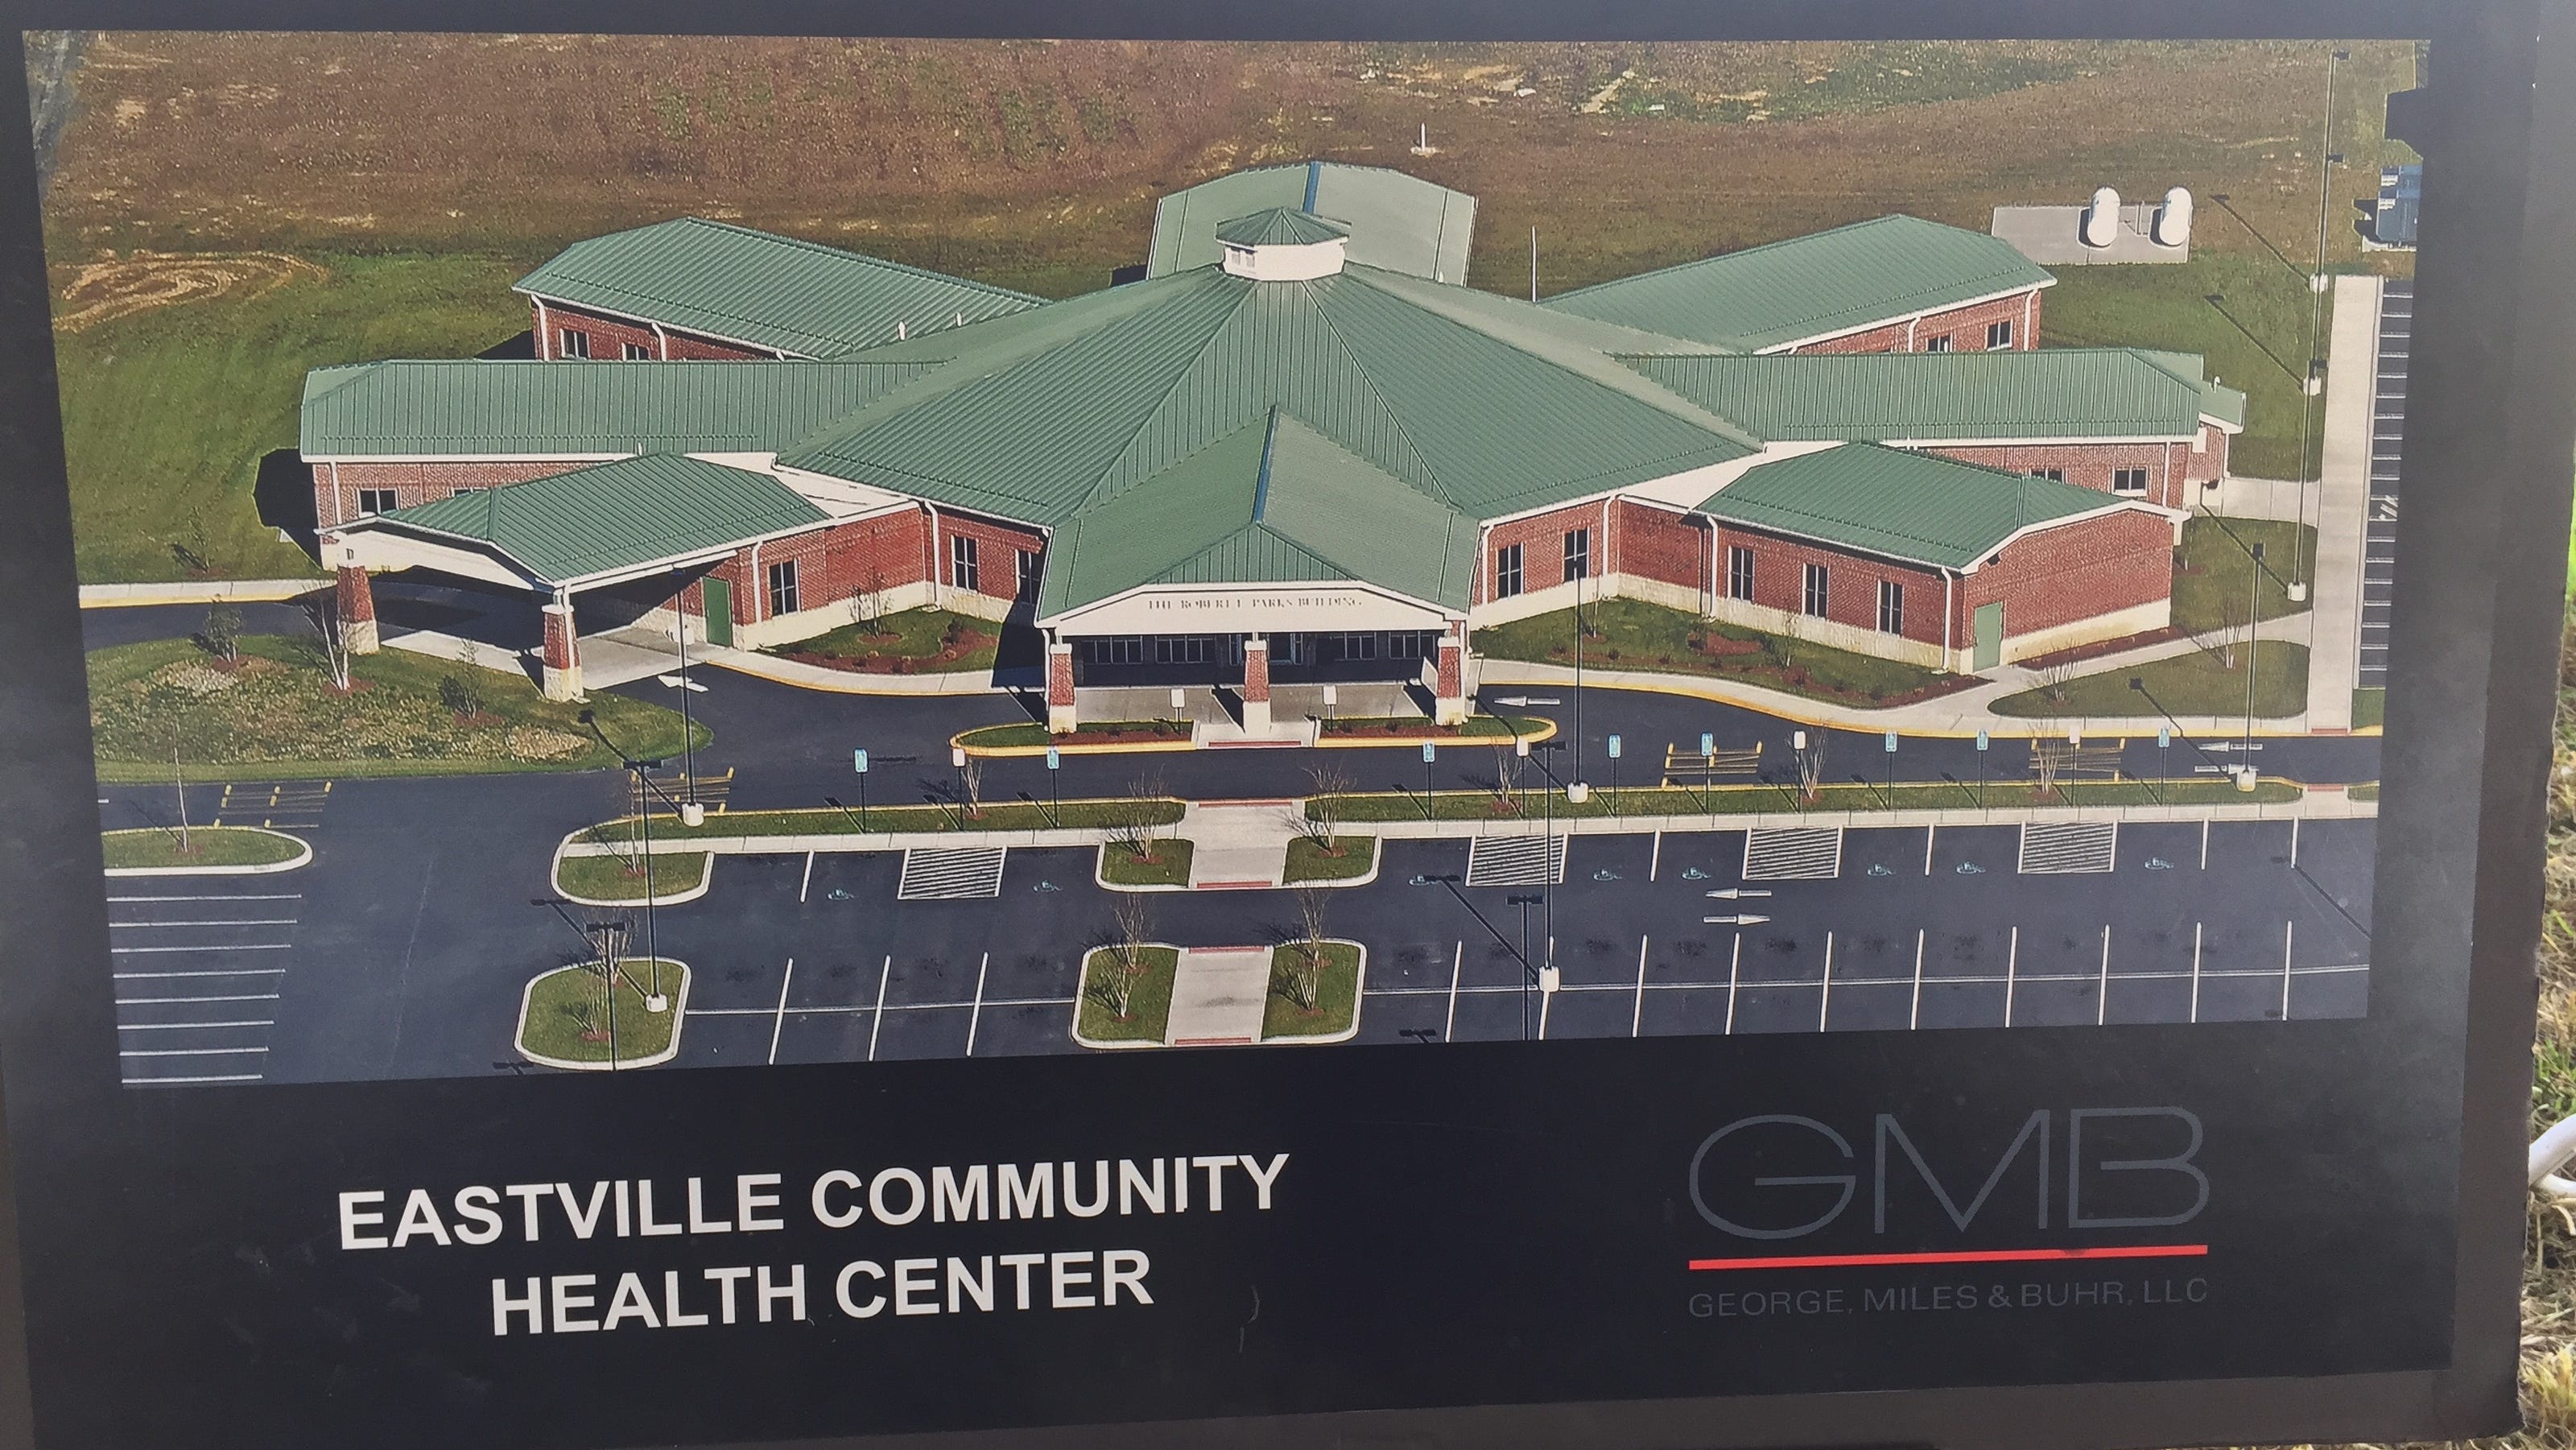  New Virginia Shore health center set to open in early 2020 